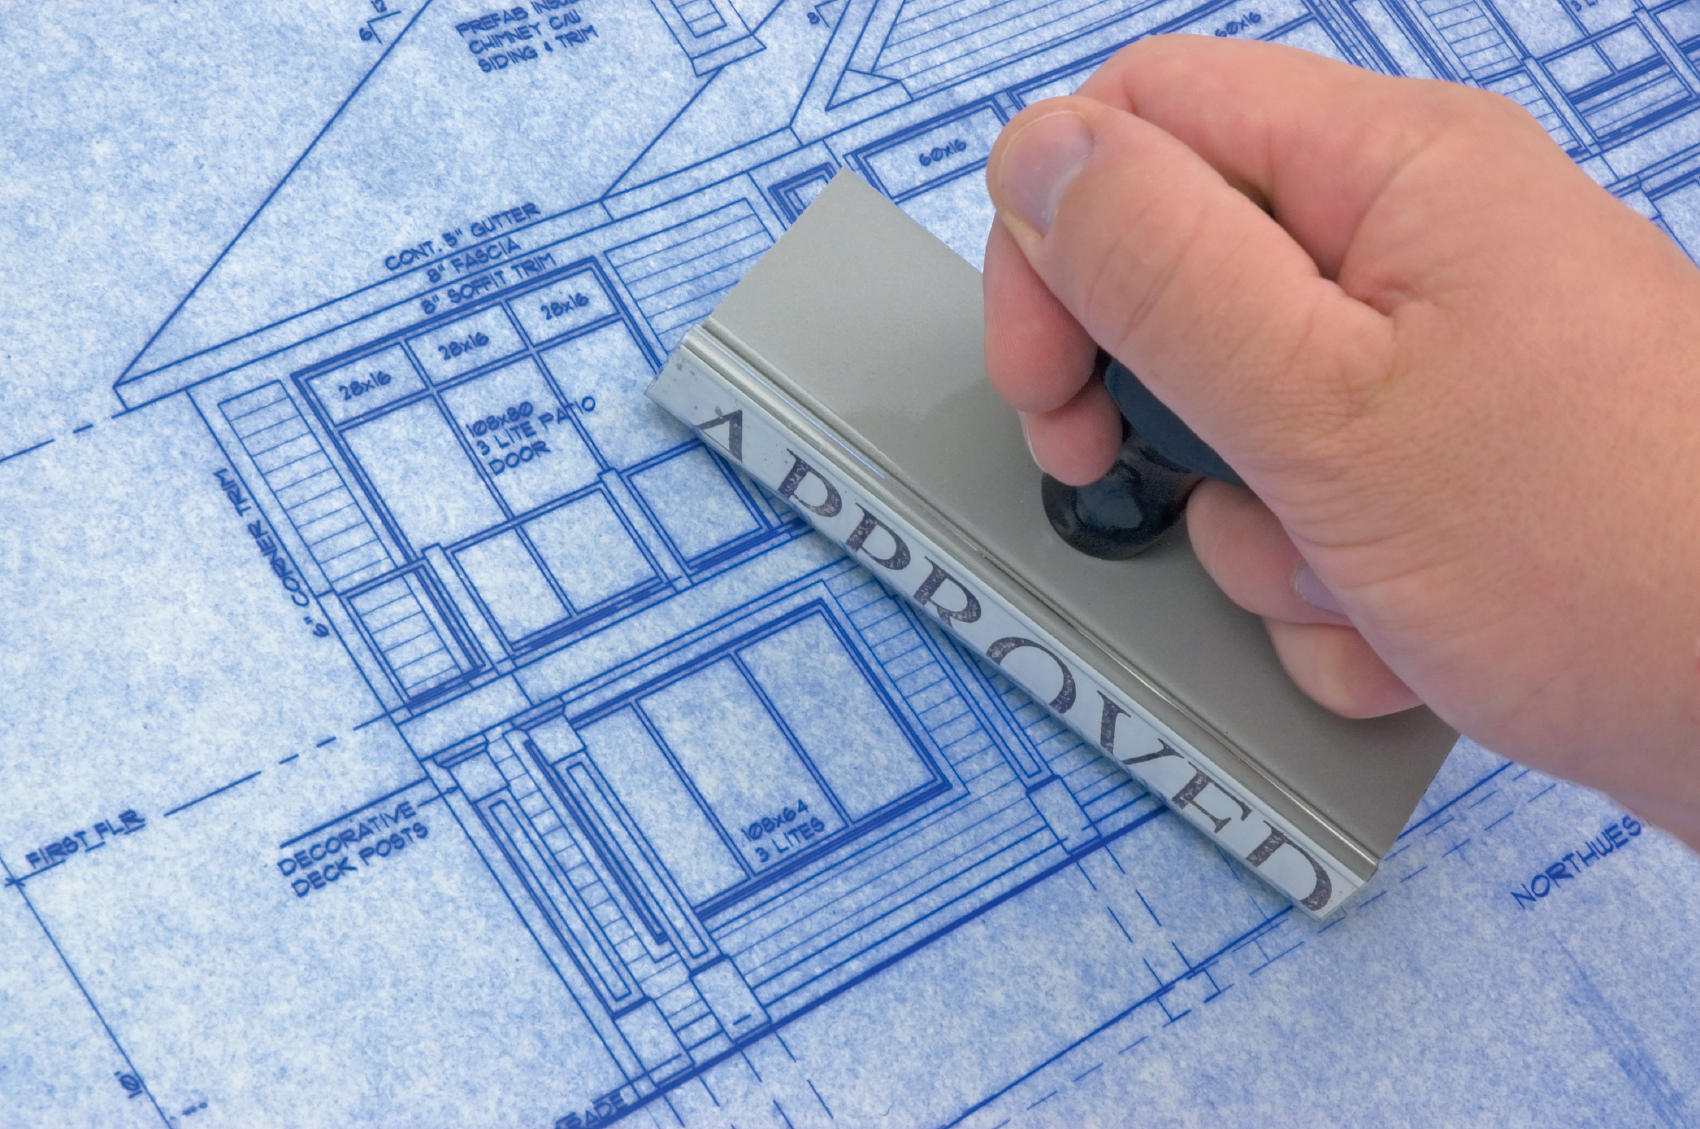 How to make a self-build planning application